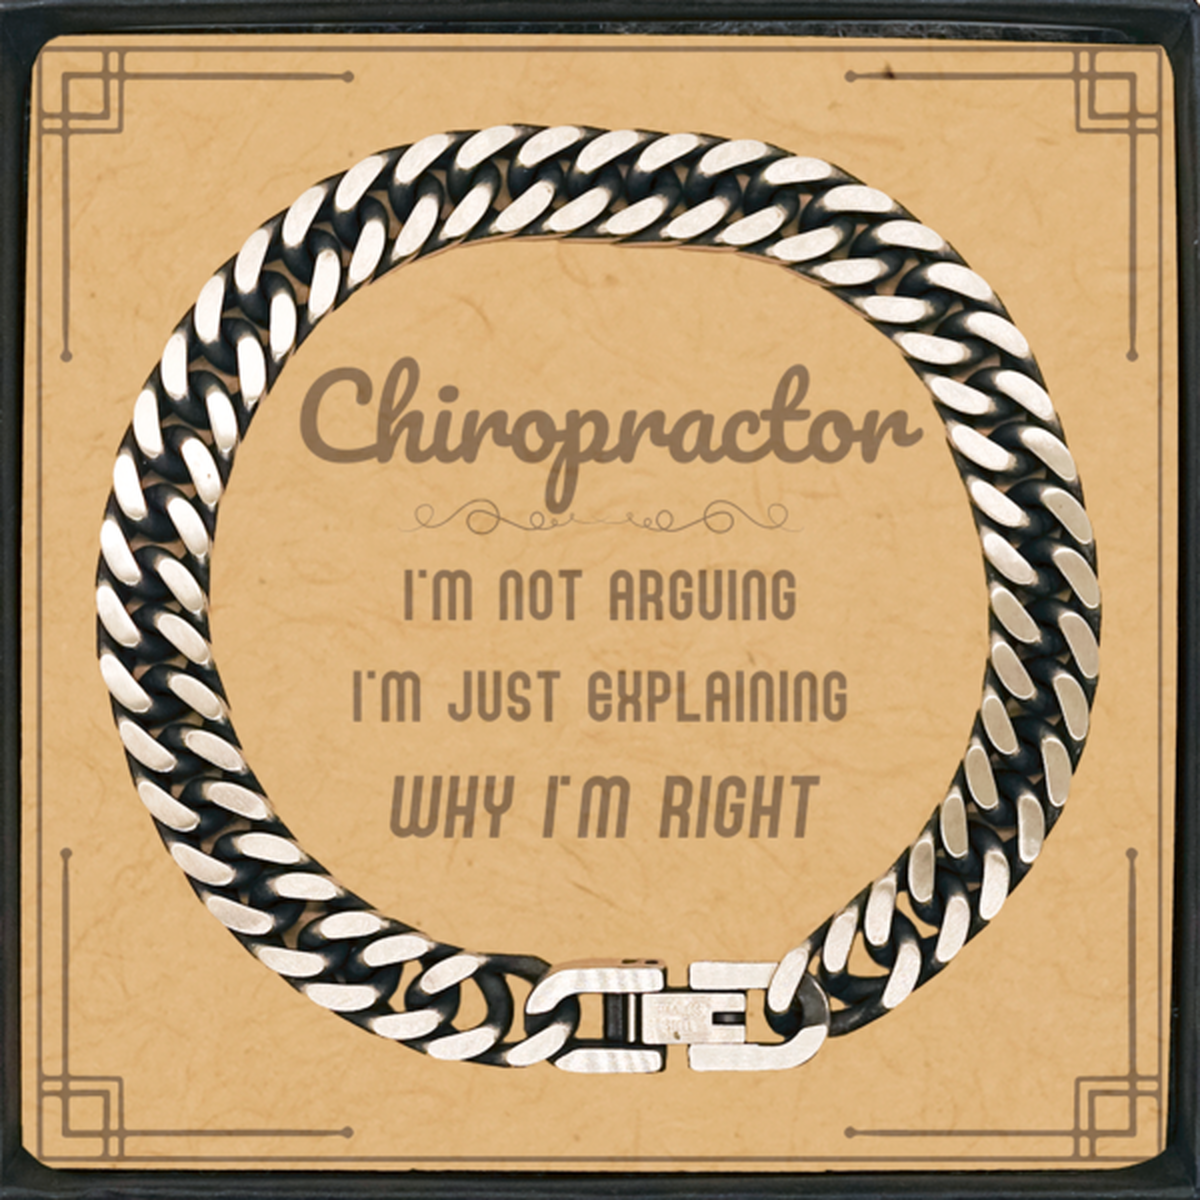 Chiropractor I'm not Arguing. I'm Just Explaining Why I'm RIGHT Cuban Link Chain Bracelet, Funny Saying Quote Chiropractor Gifts For Chiropractor Message Card Graduation Birthday Christmas Gifts for Men Women Coworker